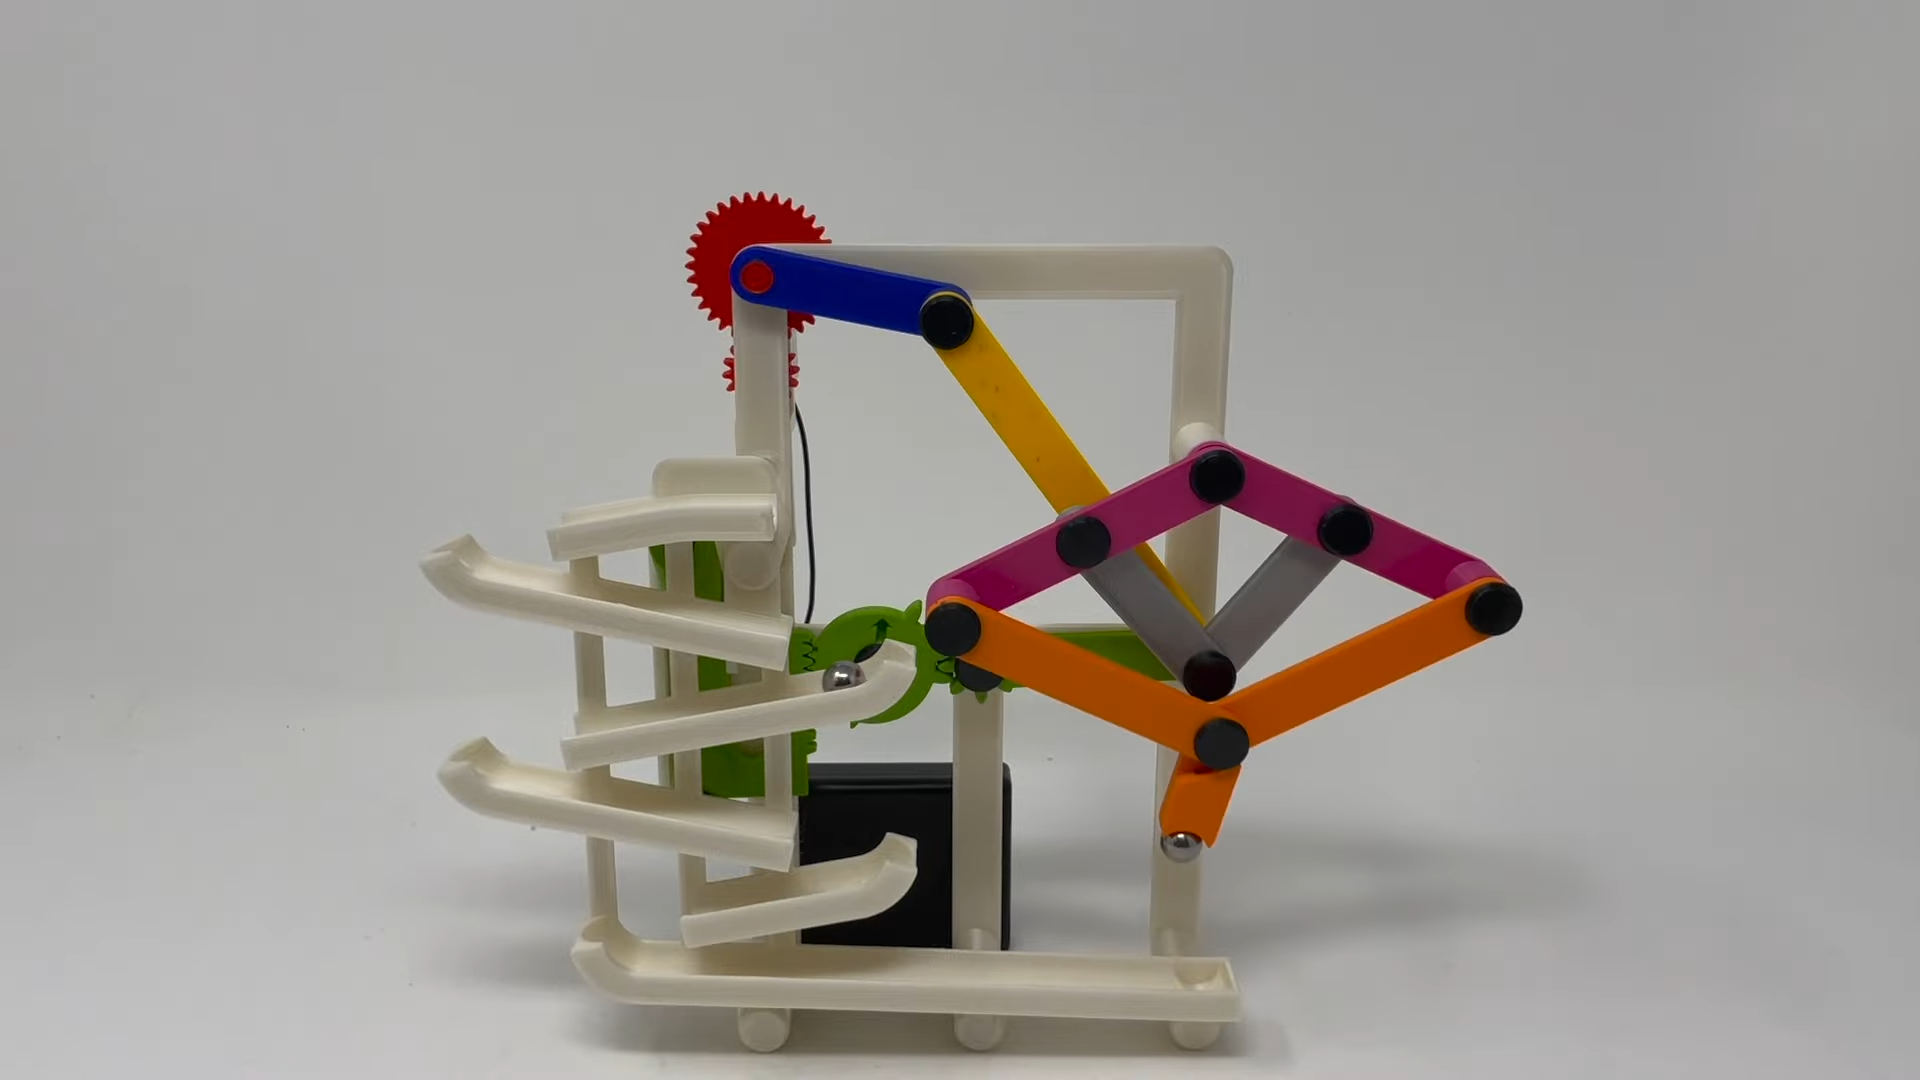 A 3D printed marble track features a neat elevator linkage